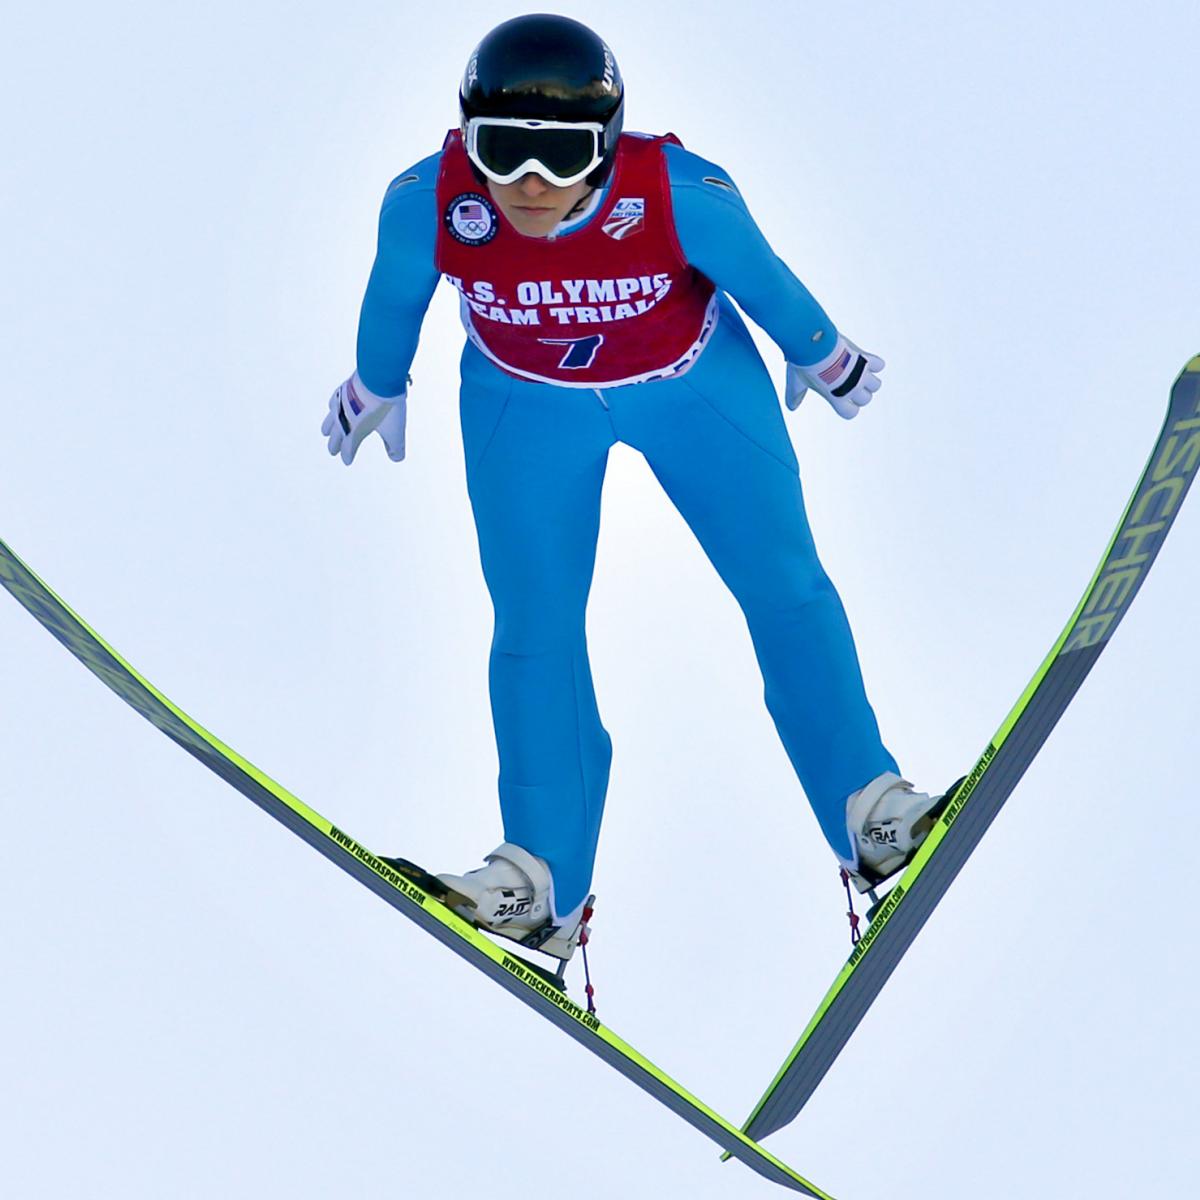 Women's Normal Hill Ski Jumping Olympics 2014: Potential Stars in Debut Event ...1200 x 1200